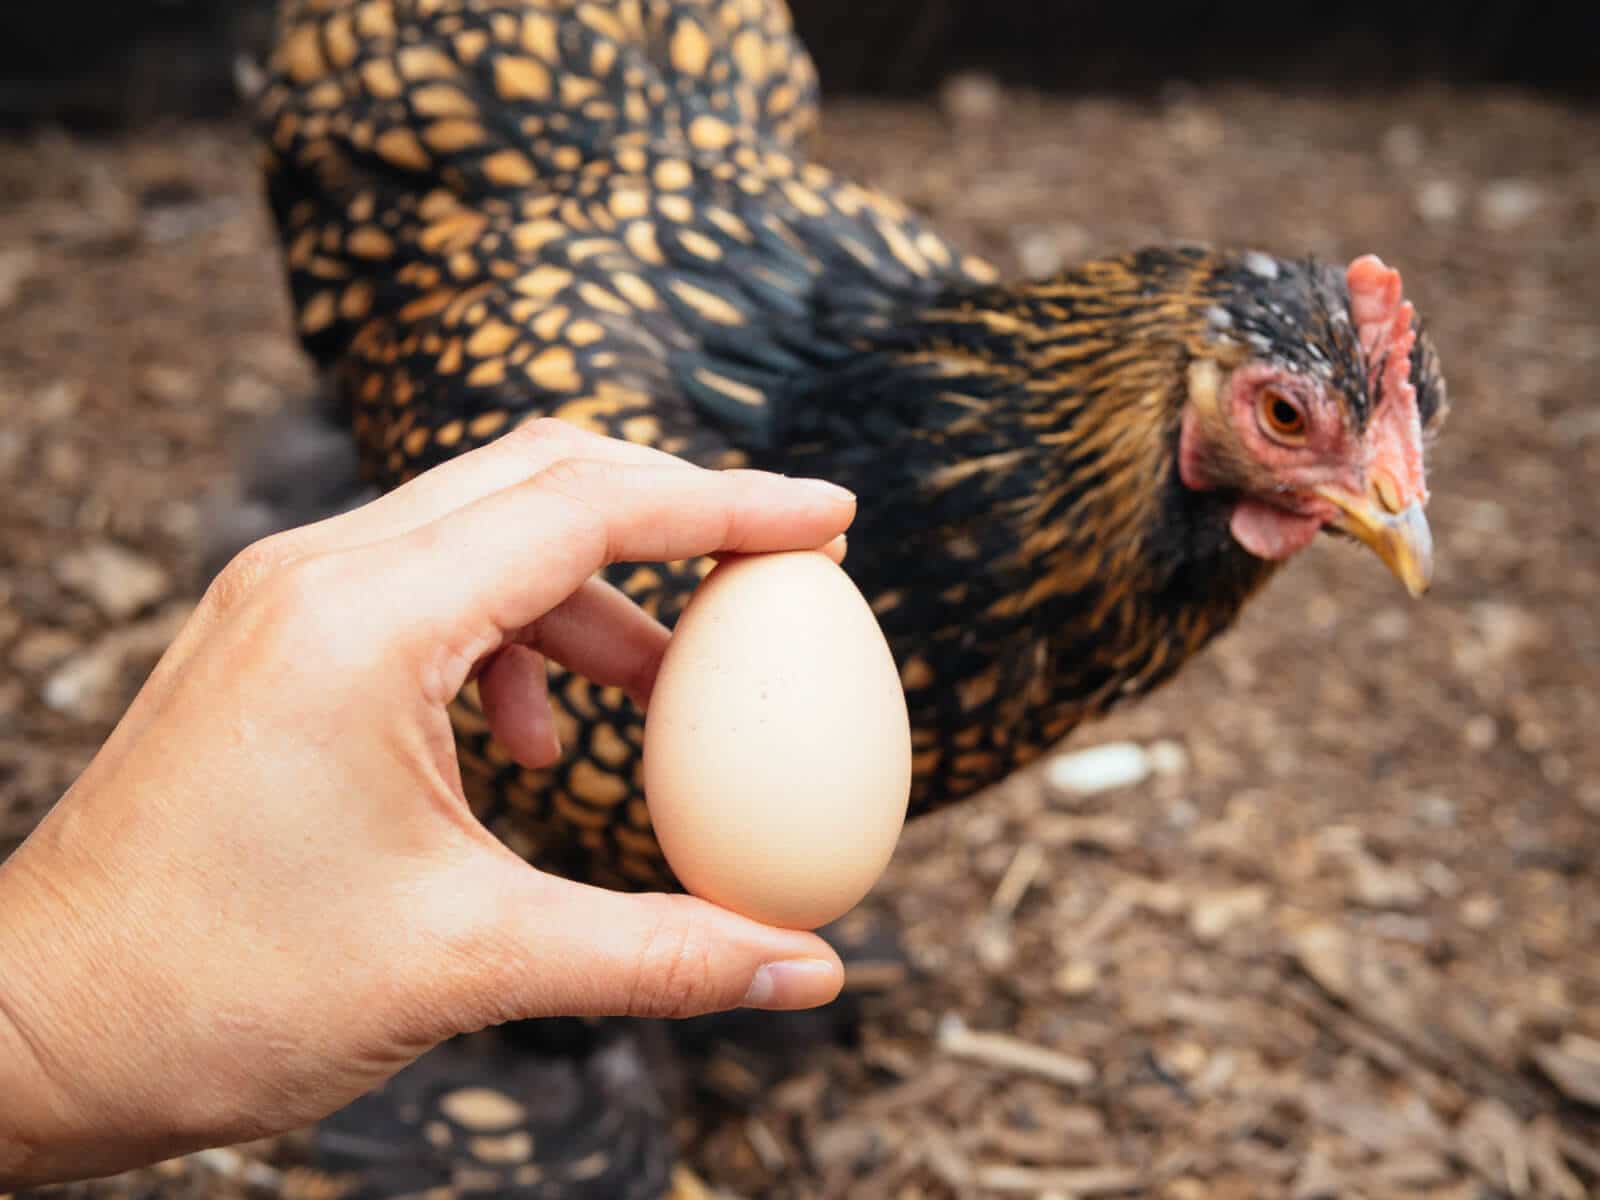 Backyard eggs shouldn't be washed before storing